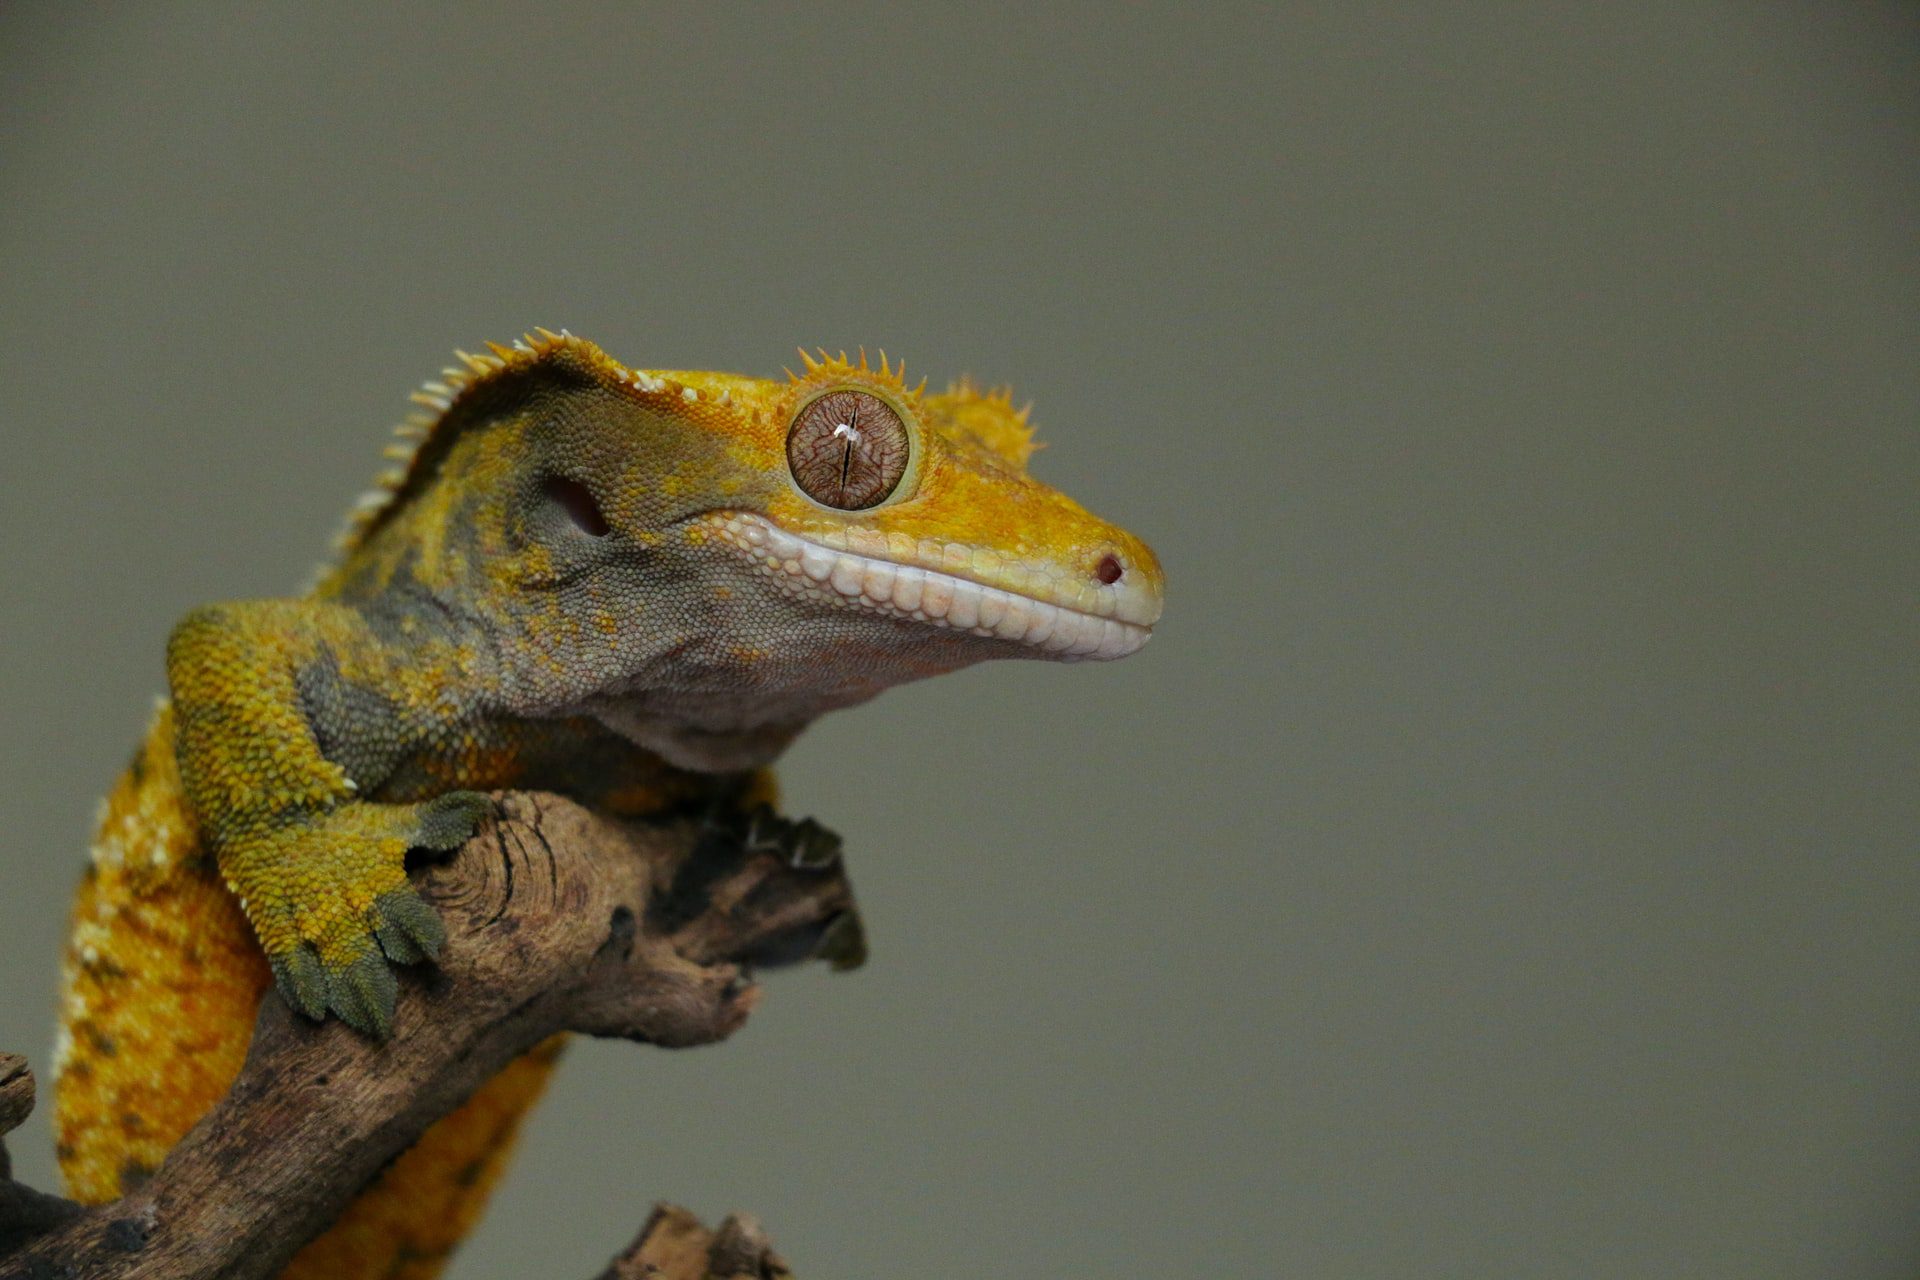 Crested Gecko on a branch